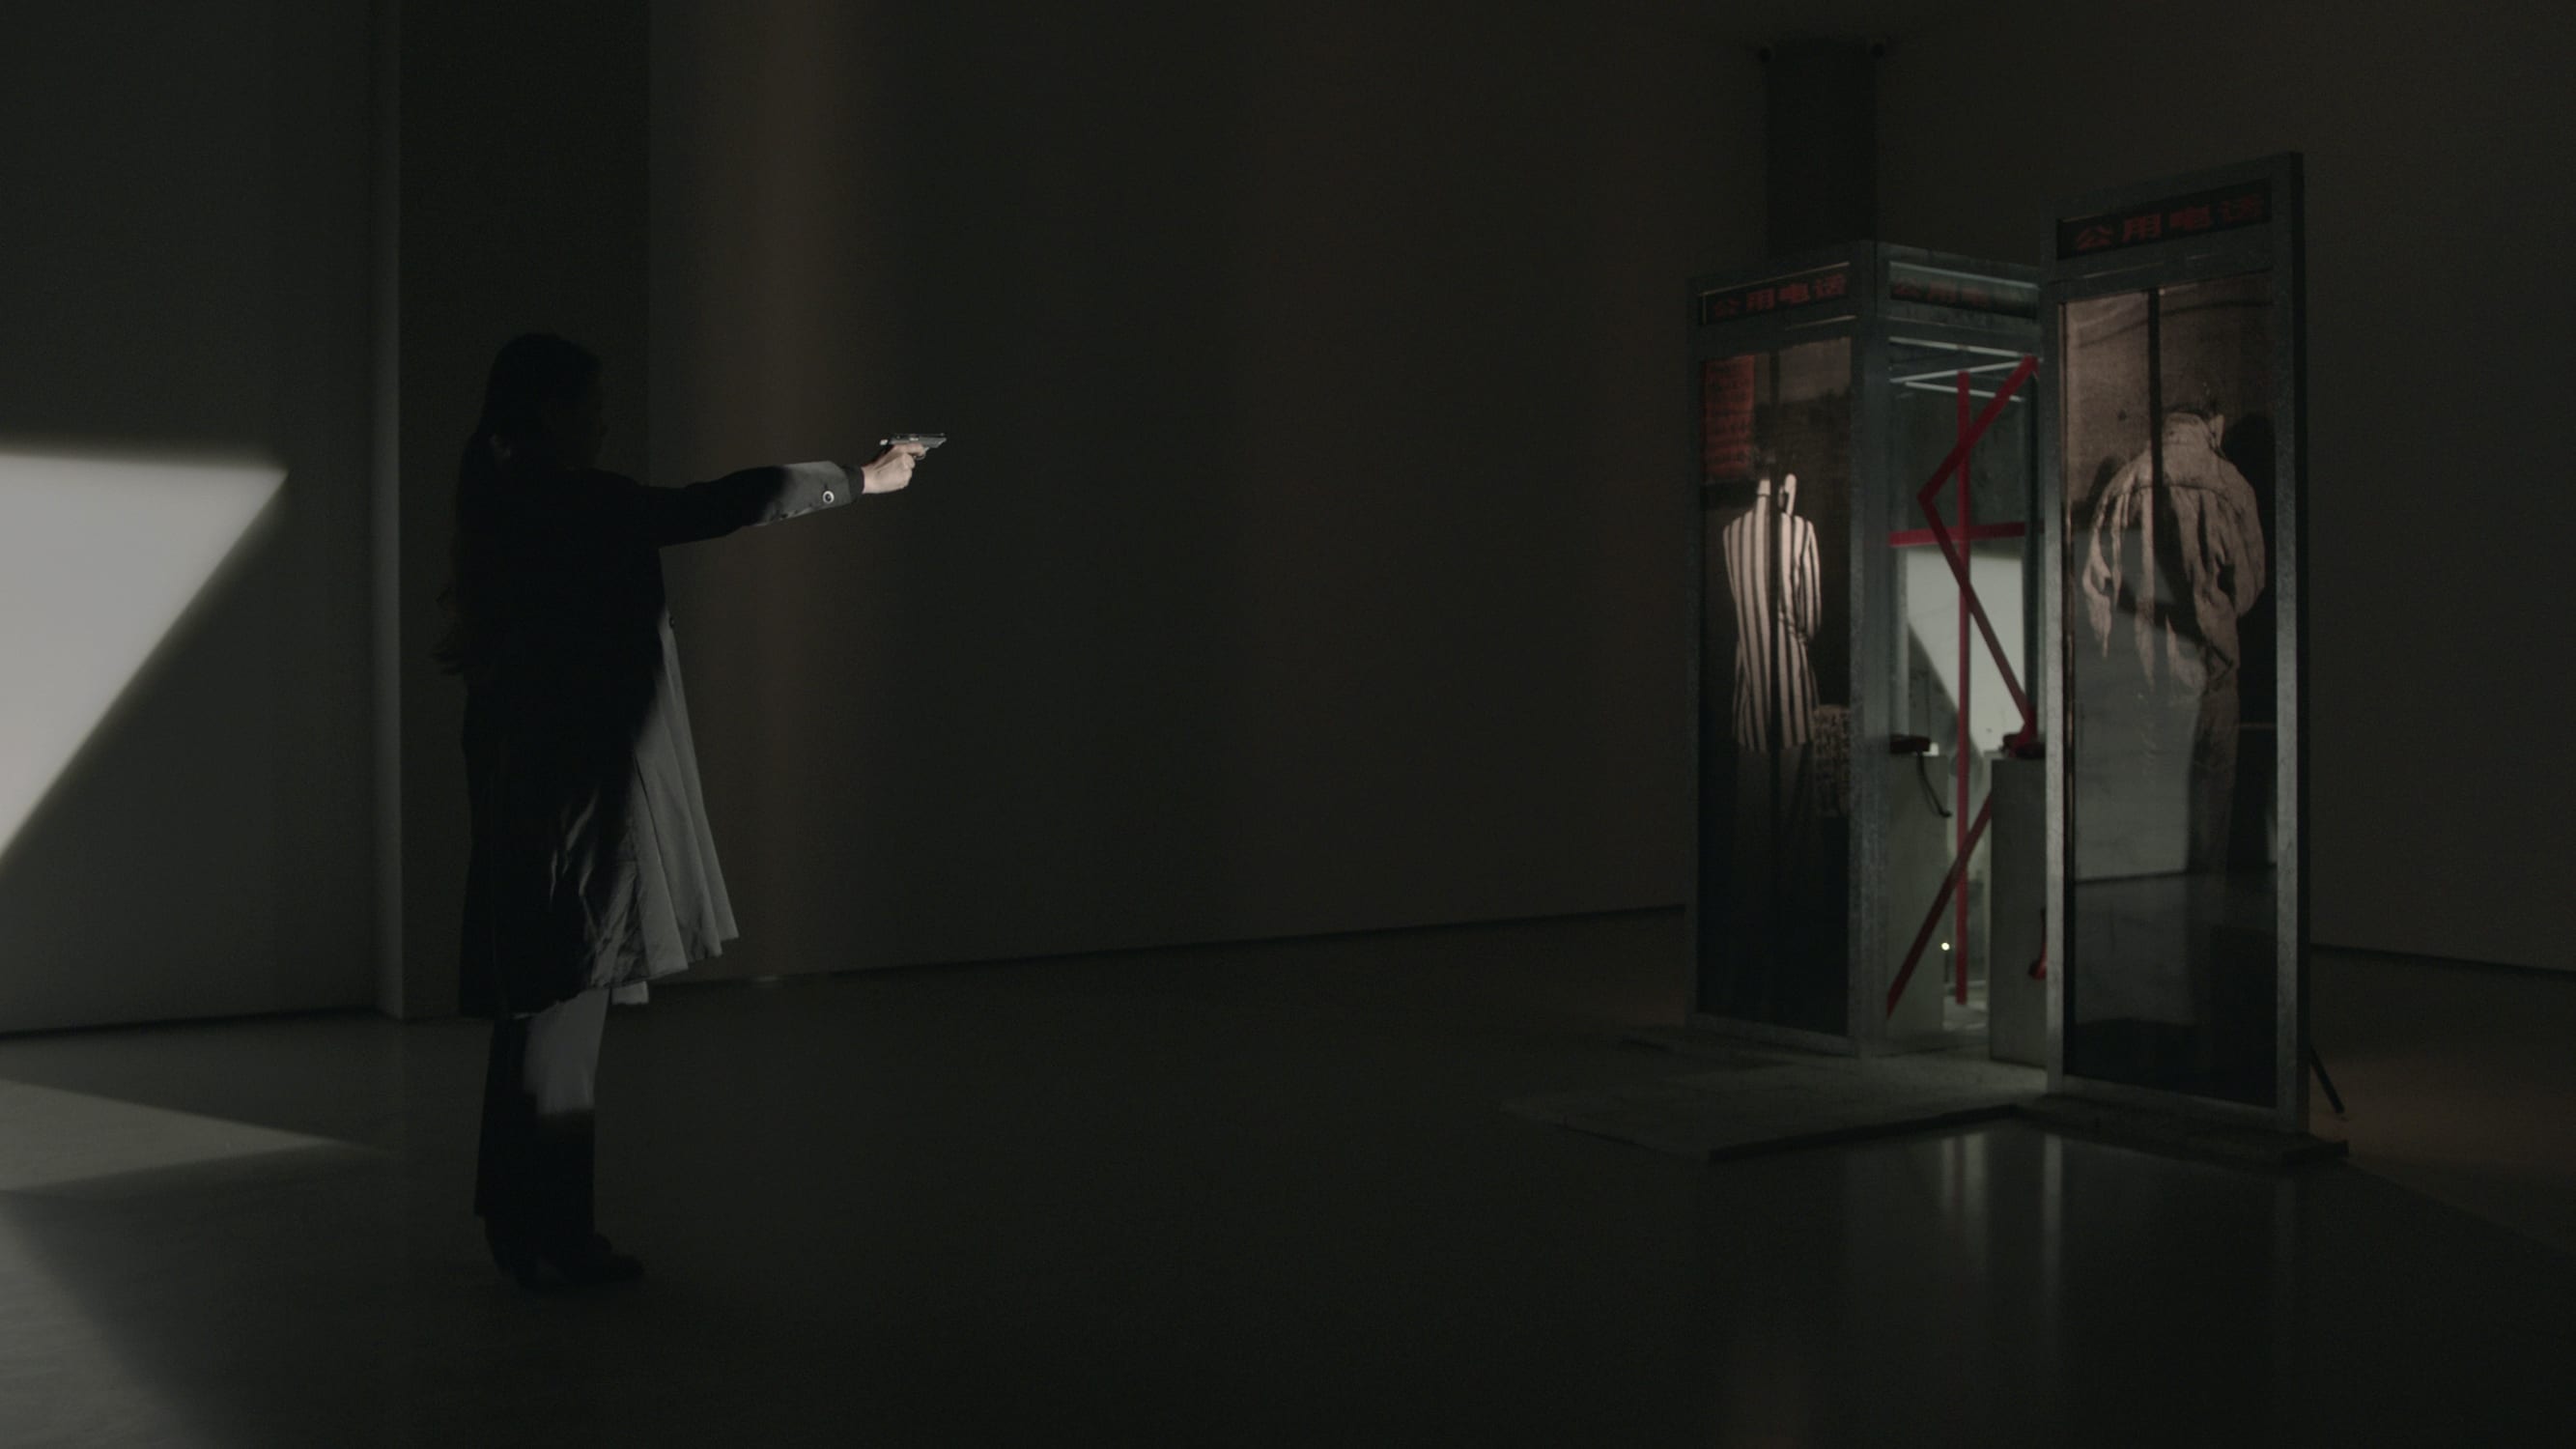 Wang Tuo, The Second Interrogation, 2022. Courtesy of the artist and White Space, Beijing.